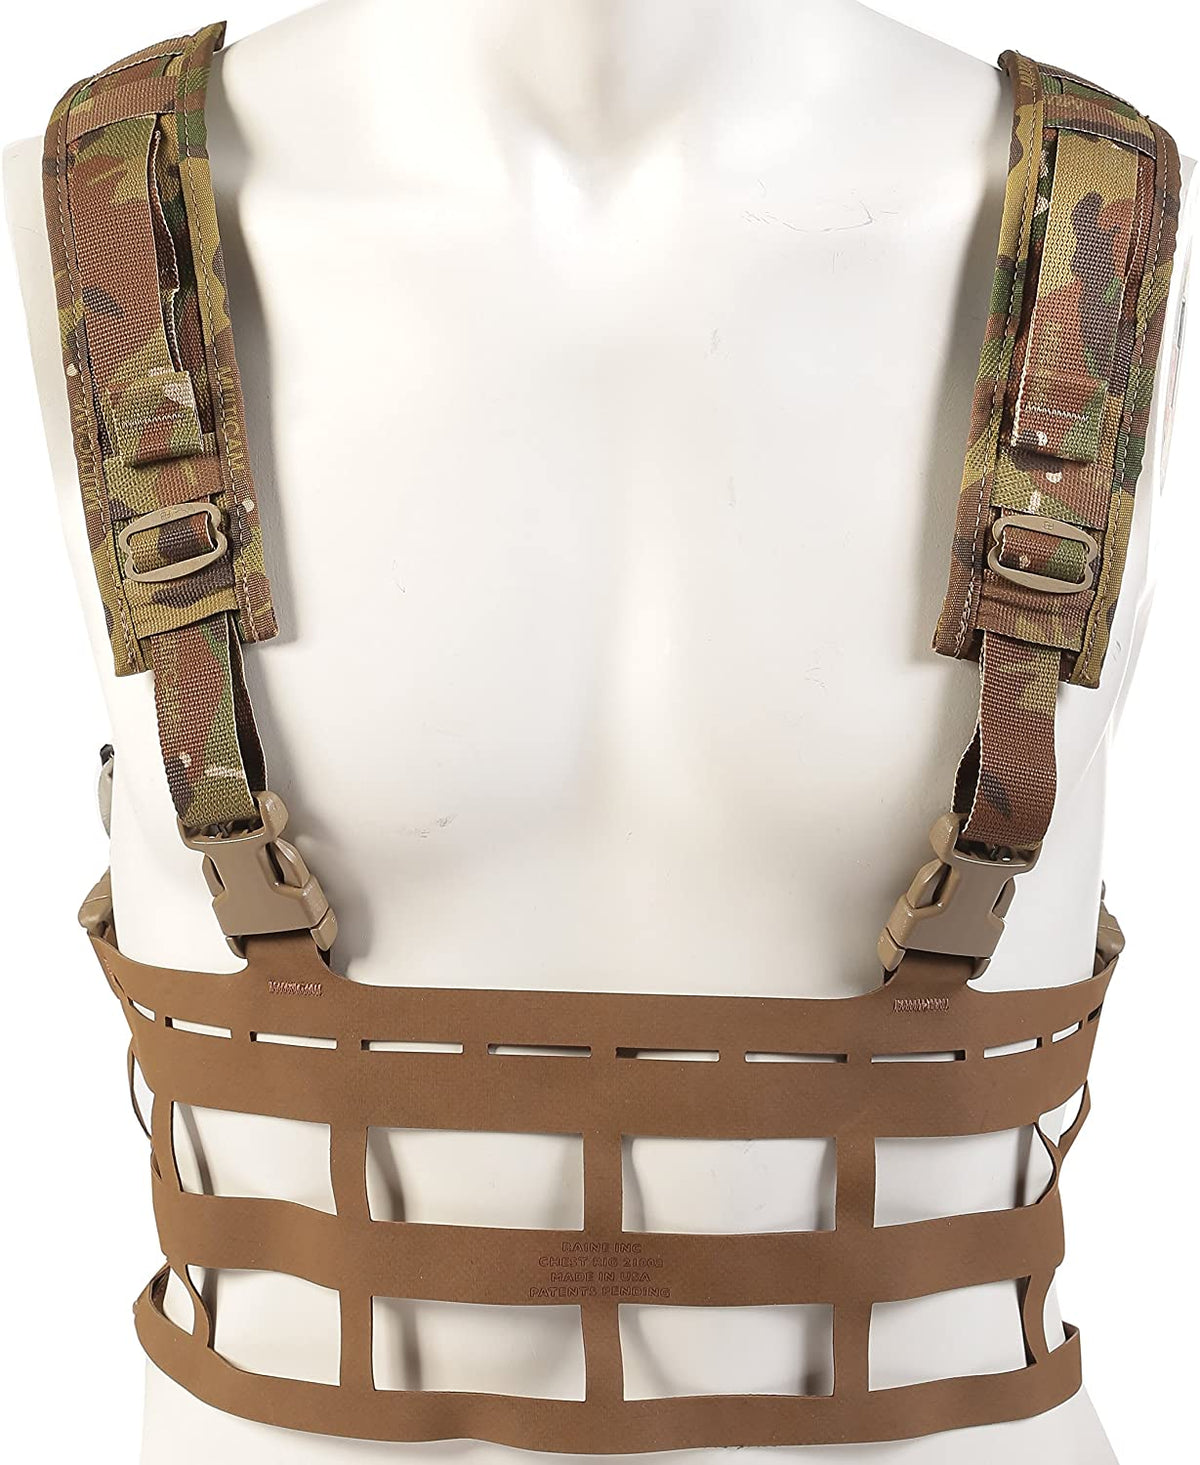 Raine Vector Lightweight MOLLE Chest Rig - Made in U.S.A.